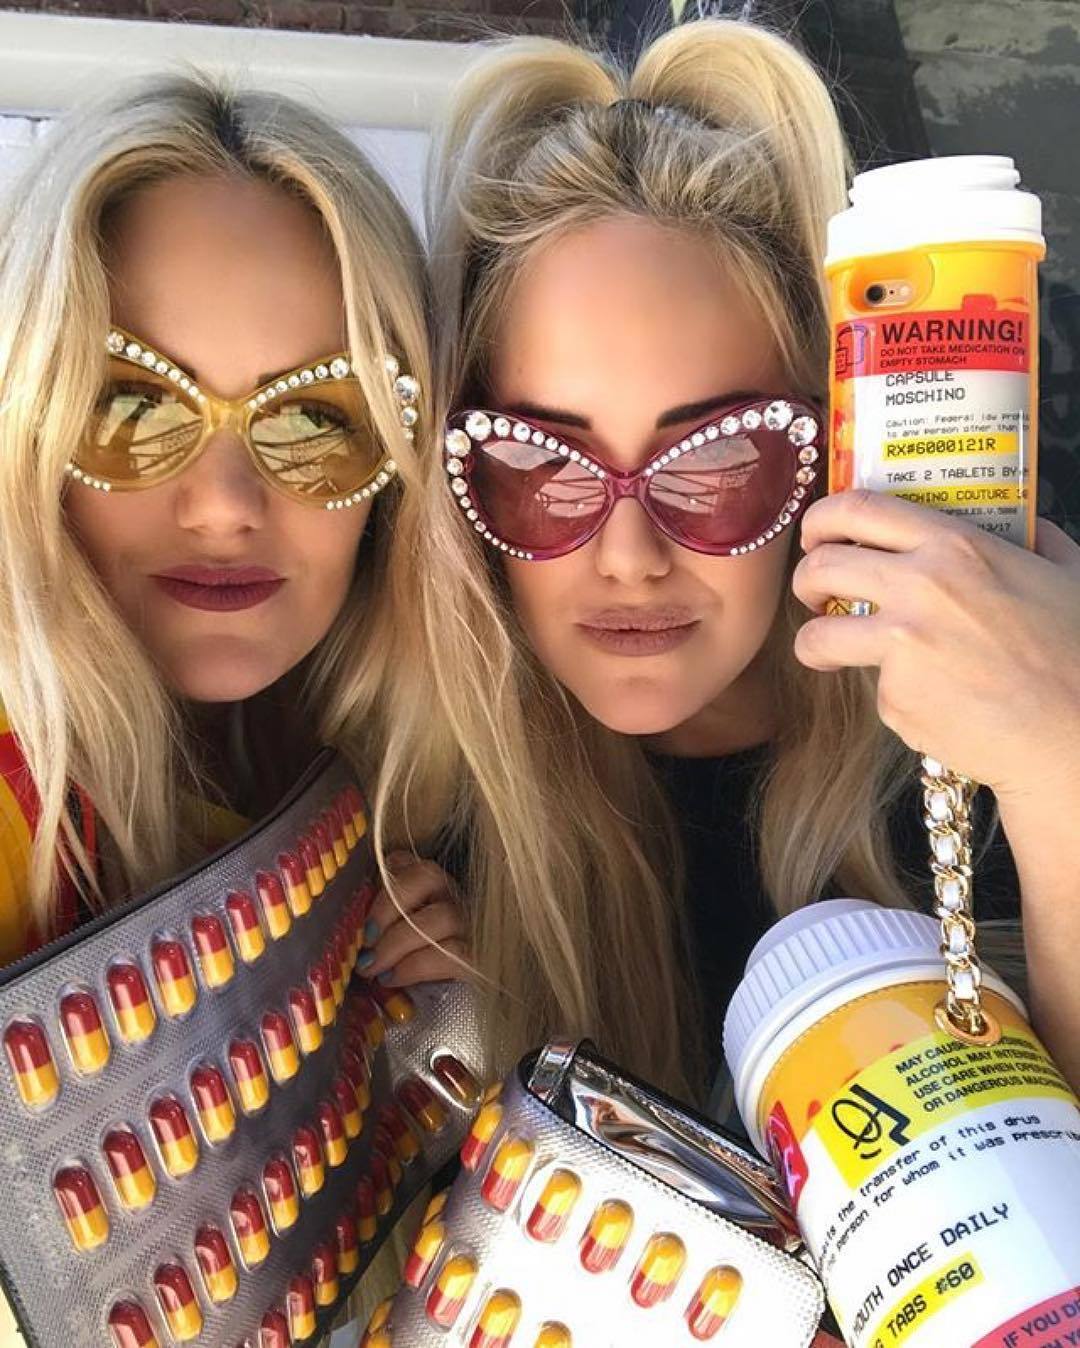 Moschino drug-themed collection pulled from shelves, The Independent